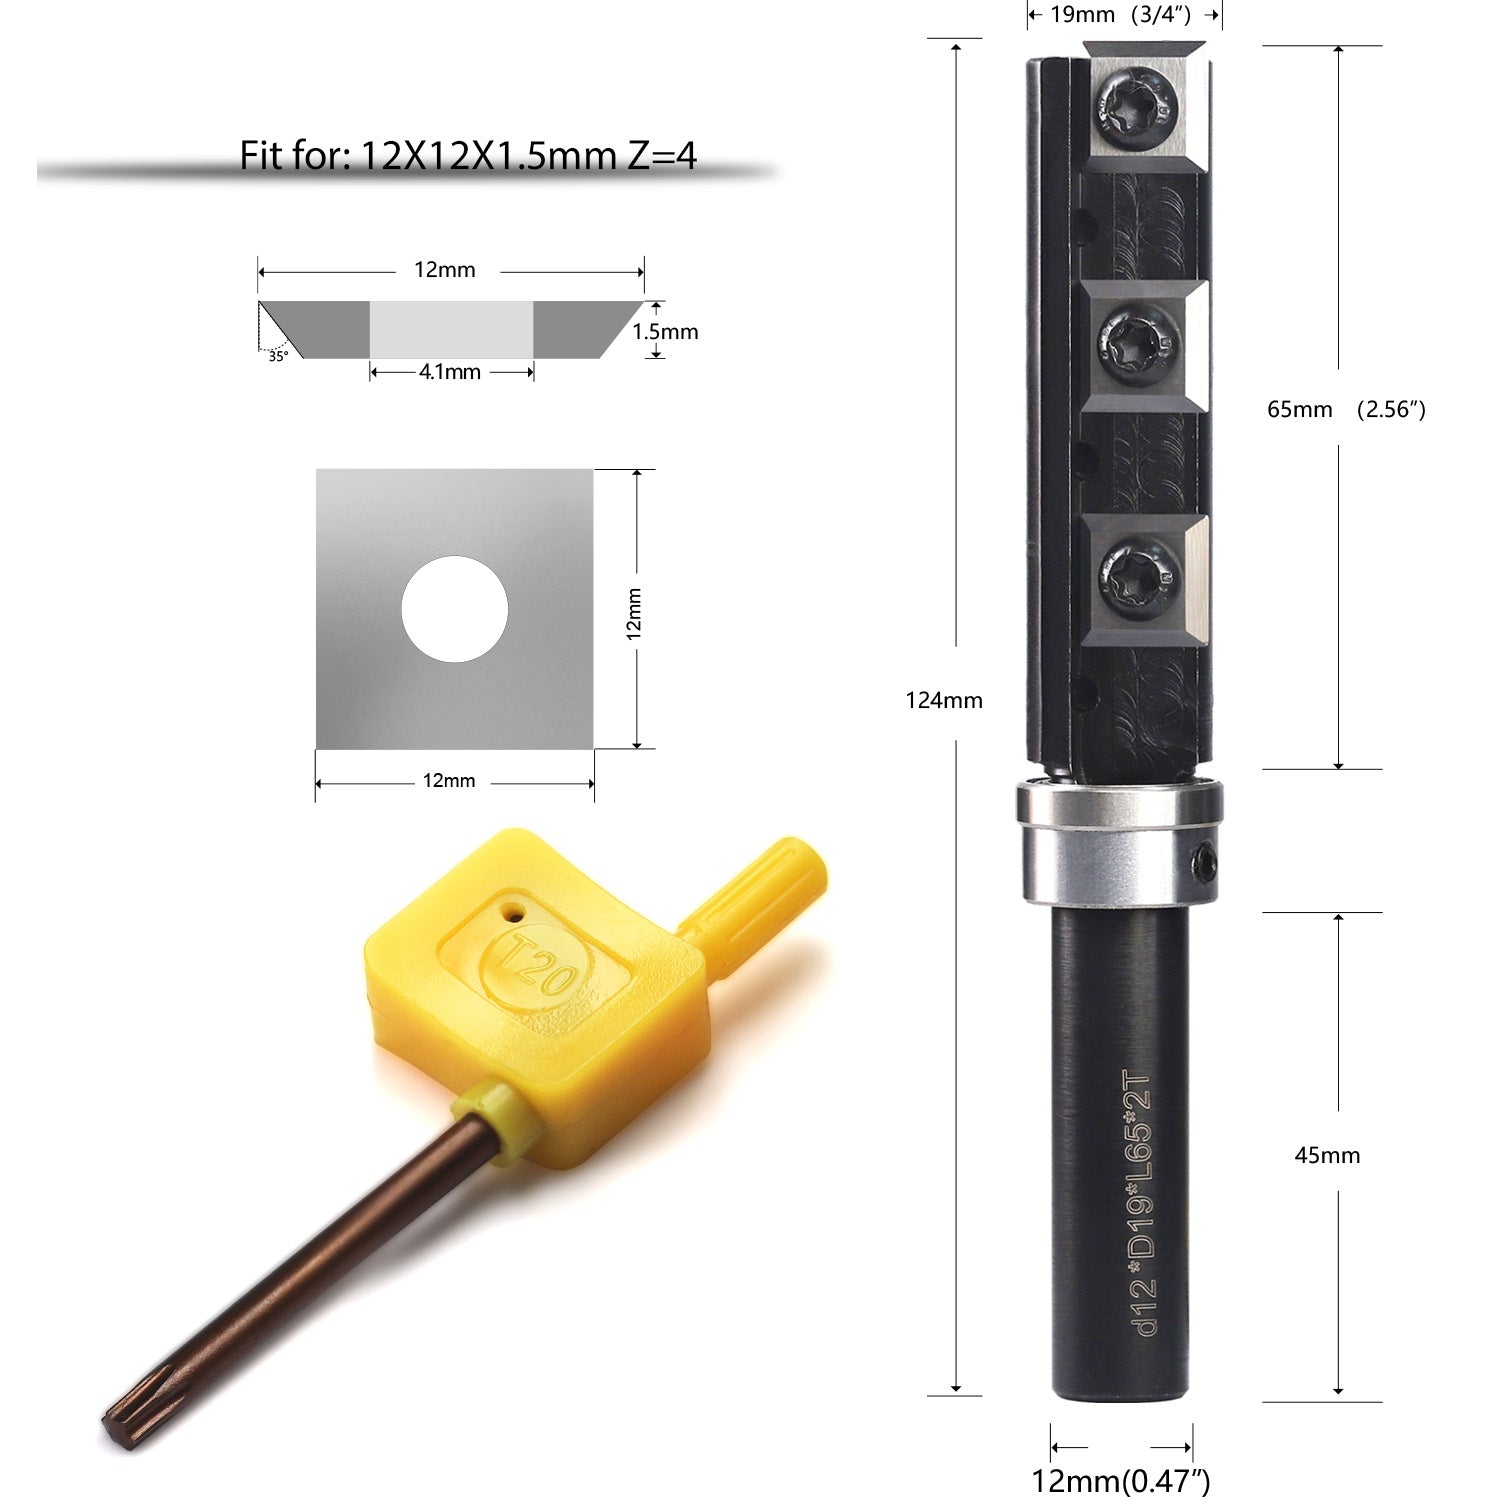 yeptooling top bearing flush trim router bit with 6 pieces carbide inserts, 12 mm shank diameter, 3/4 inch 19 mm cutting diameter, 2.56 inch 65 mm cutting length, 4-9/10 inch 124 mm overall length